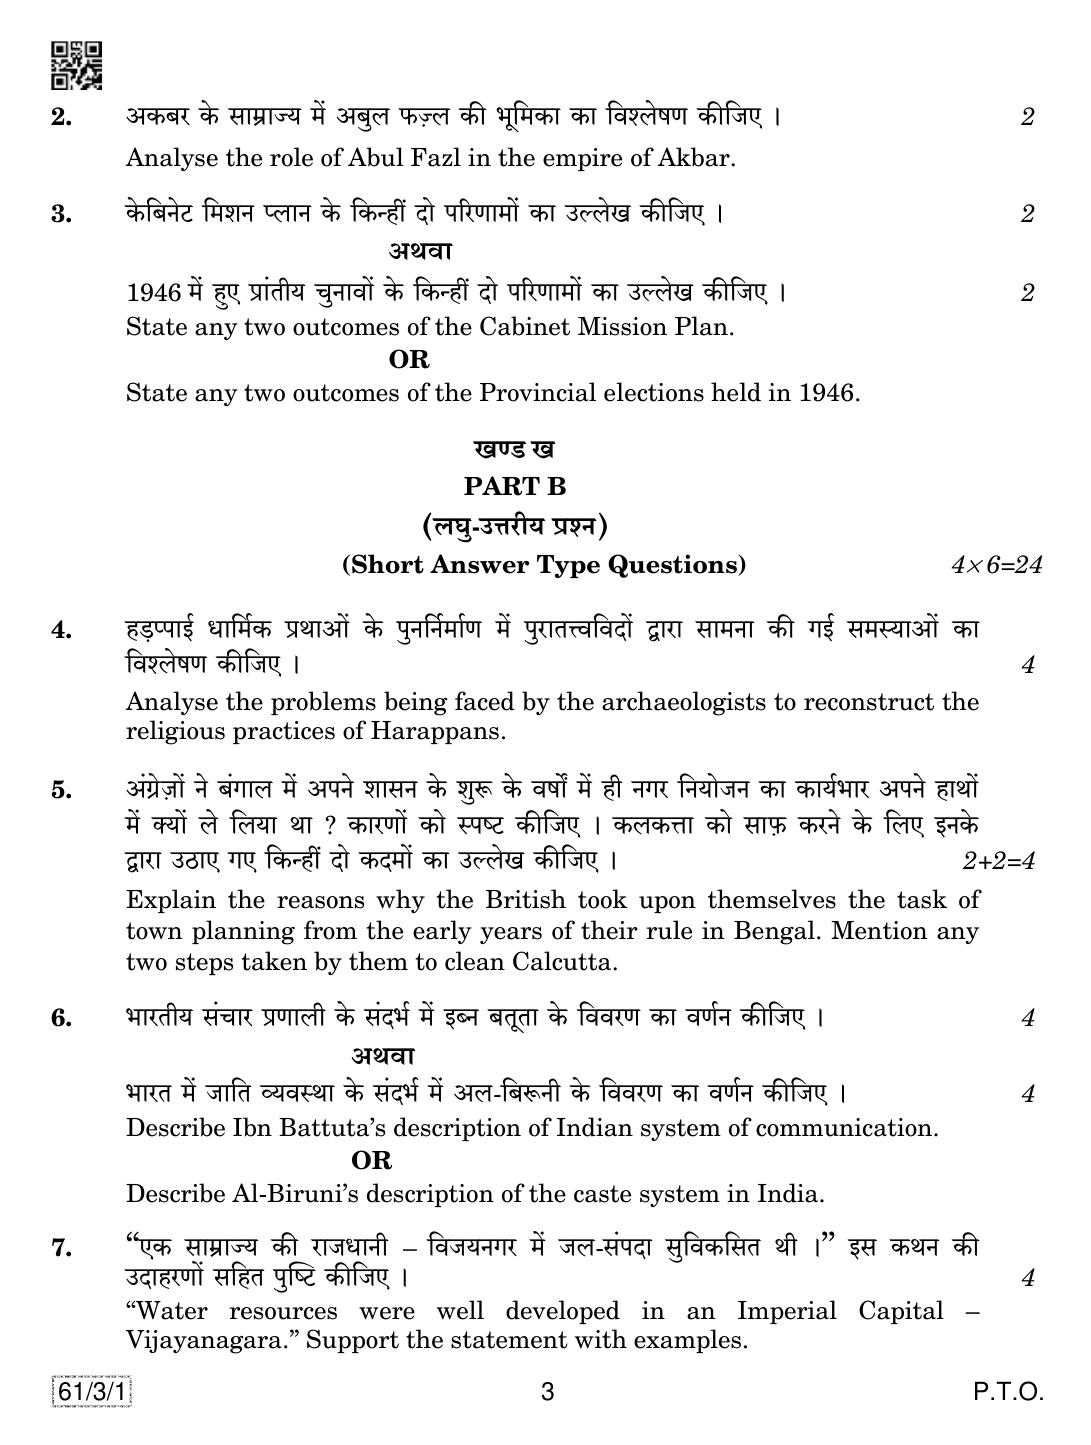 CBSE Class 12 61-3-1 History 2019 Question Paper - Page 3